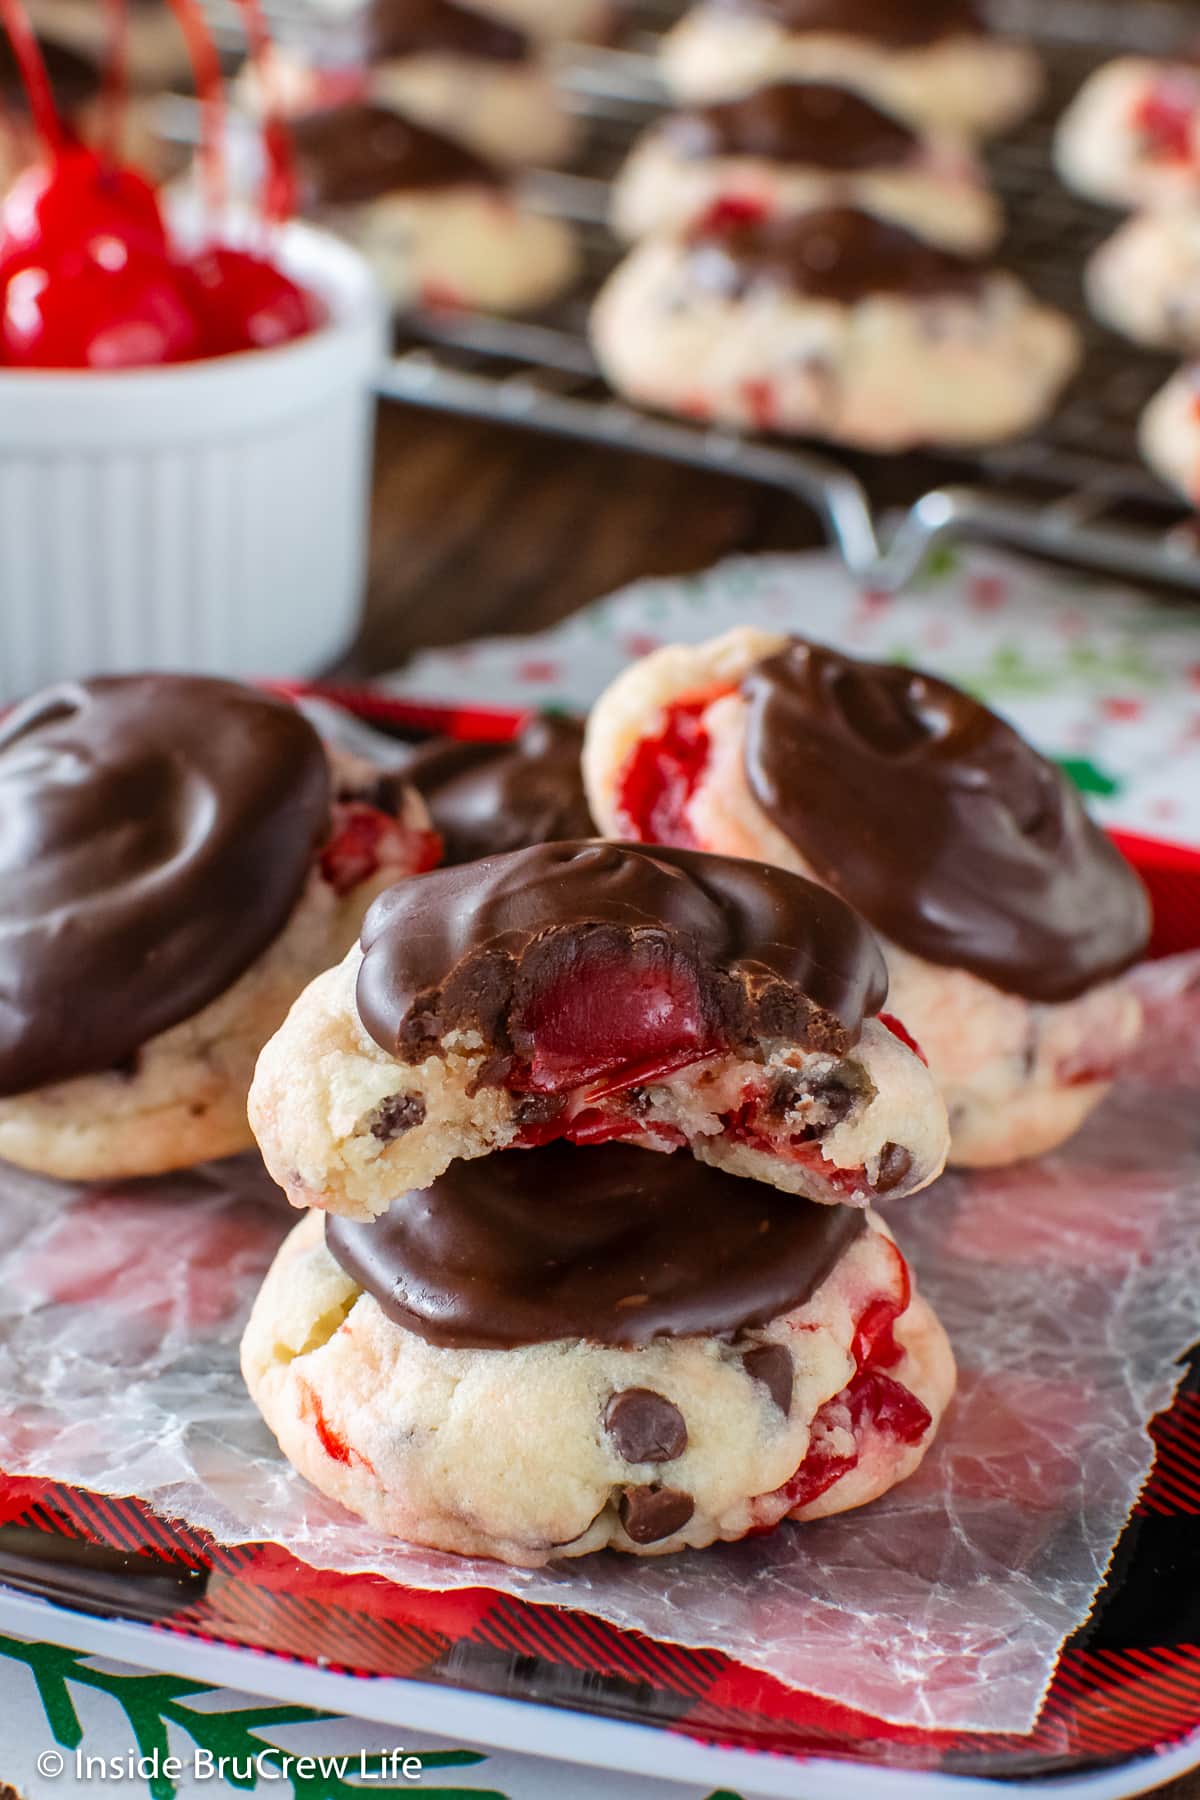 Cookies topped with cherries and chocolate on a plate.